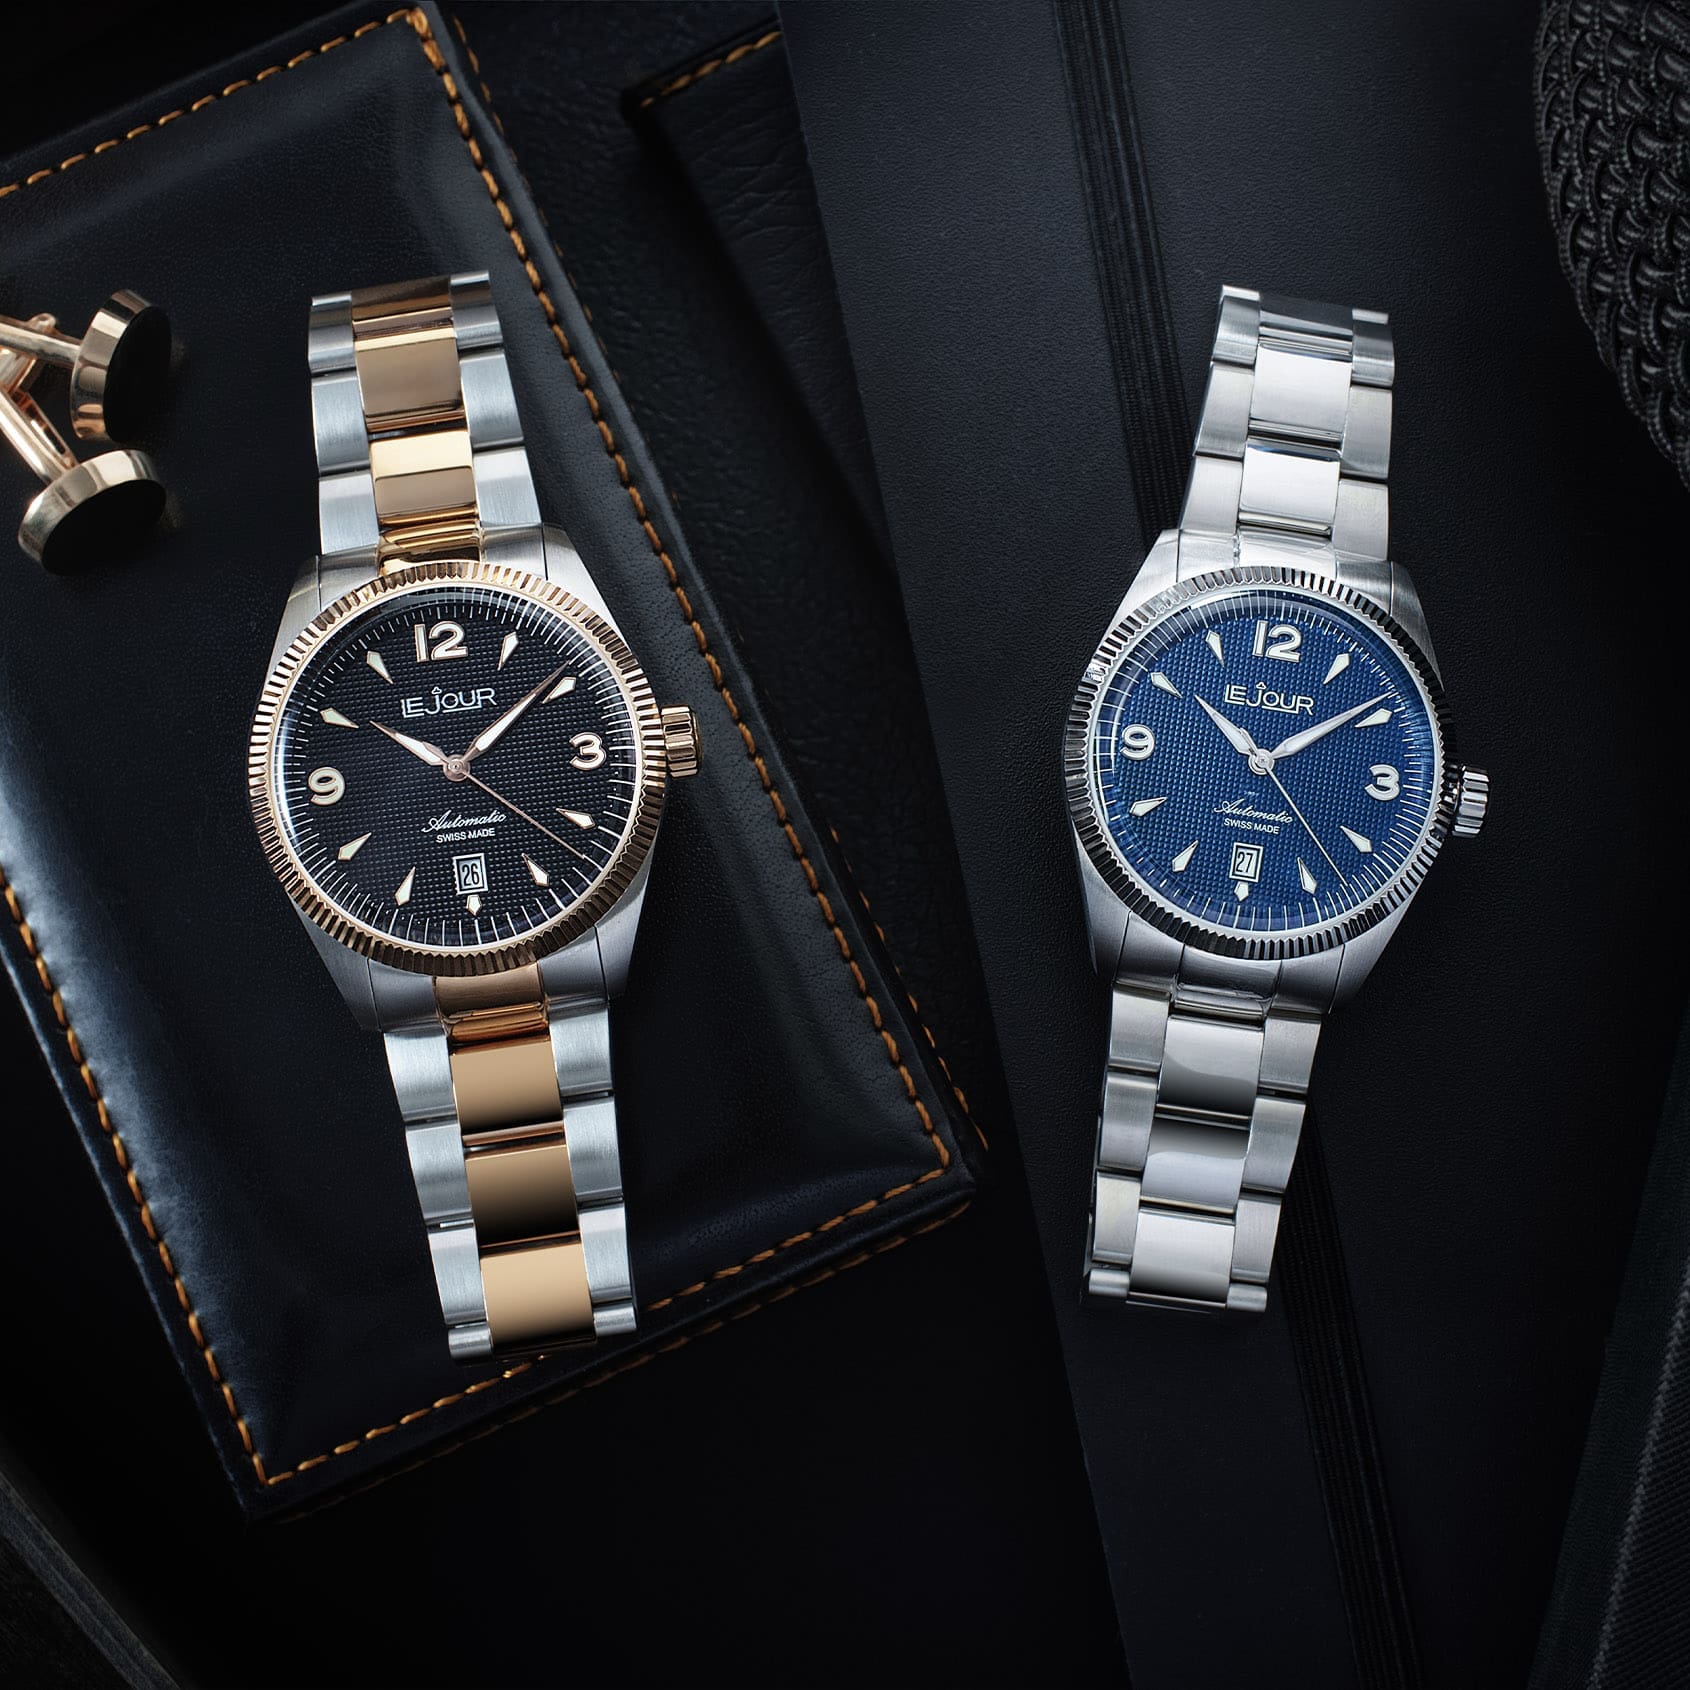 The LeJour Brooklyn throws its hat in the ring for best affordable Datejust alternative